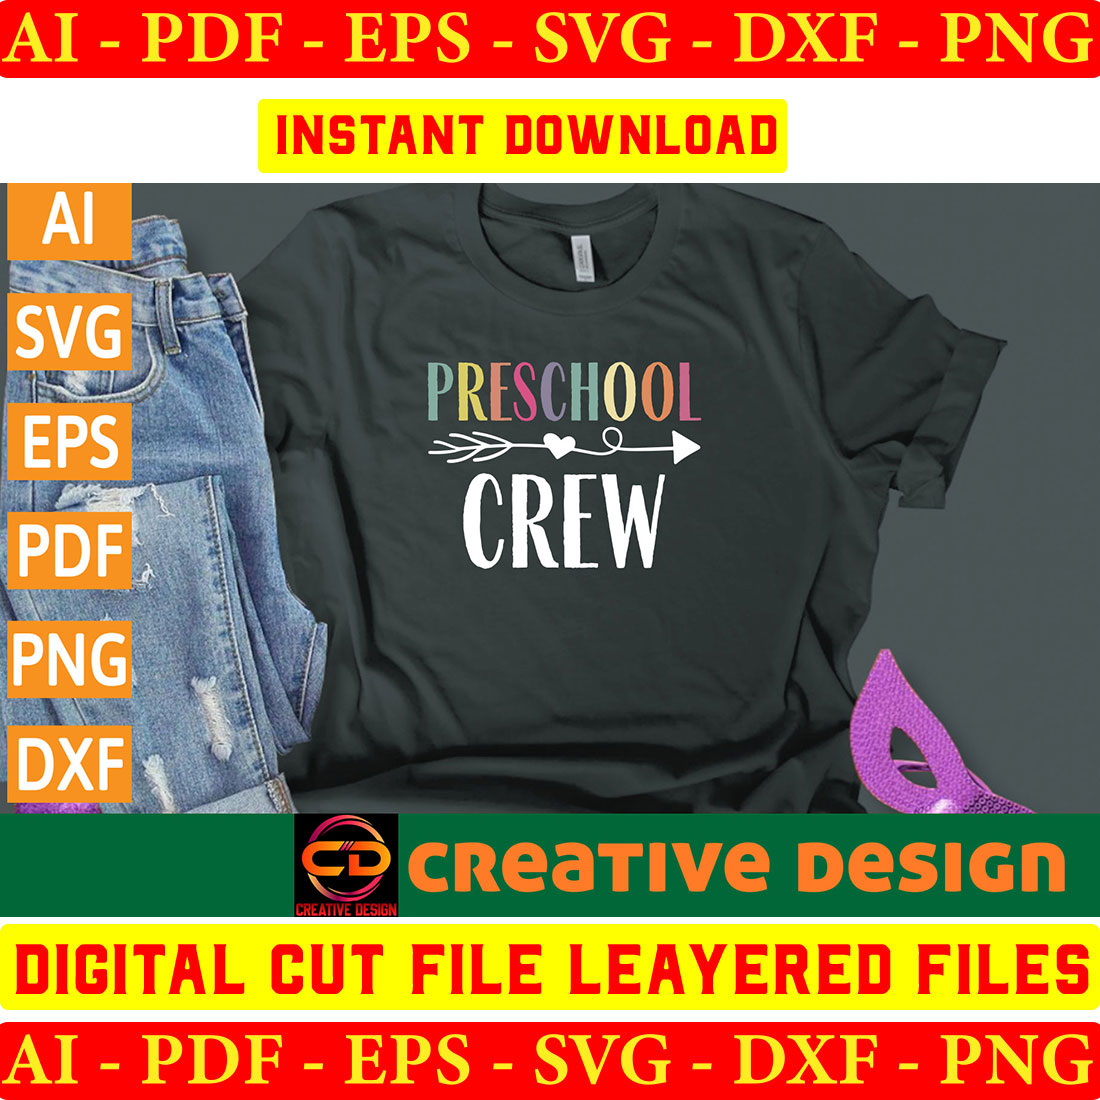 T - shirt with the words preschool crew on it.